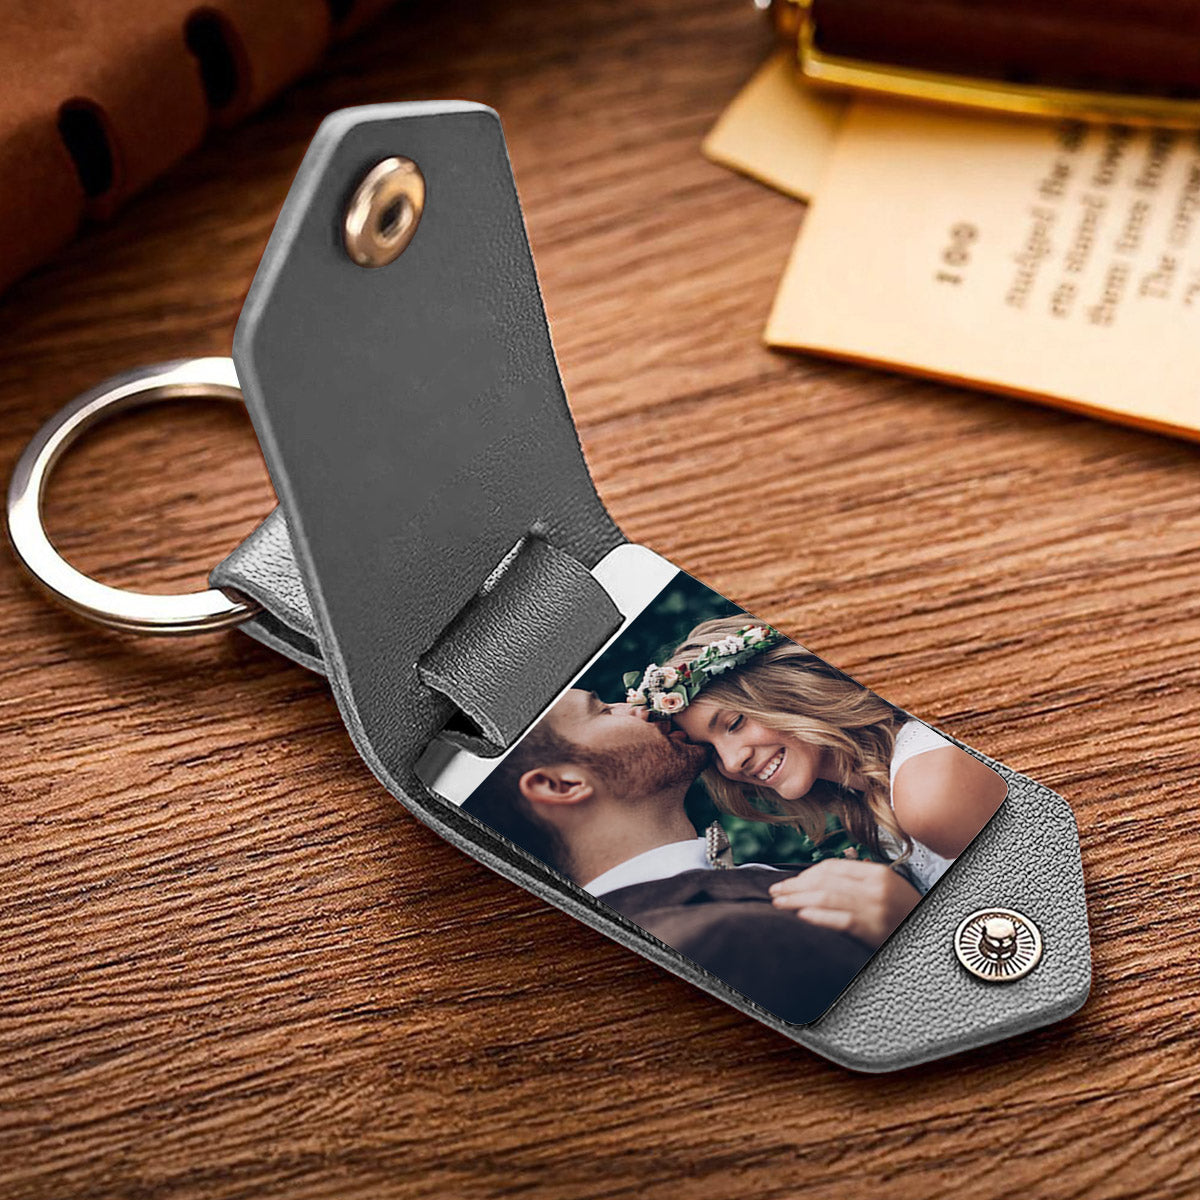 The Best Is Yet To Come - wedding gift for husband, wife, boyfriend, girlfriend - Personalized Leather Photo Keychain